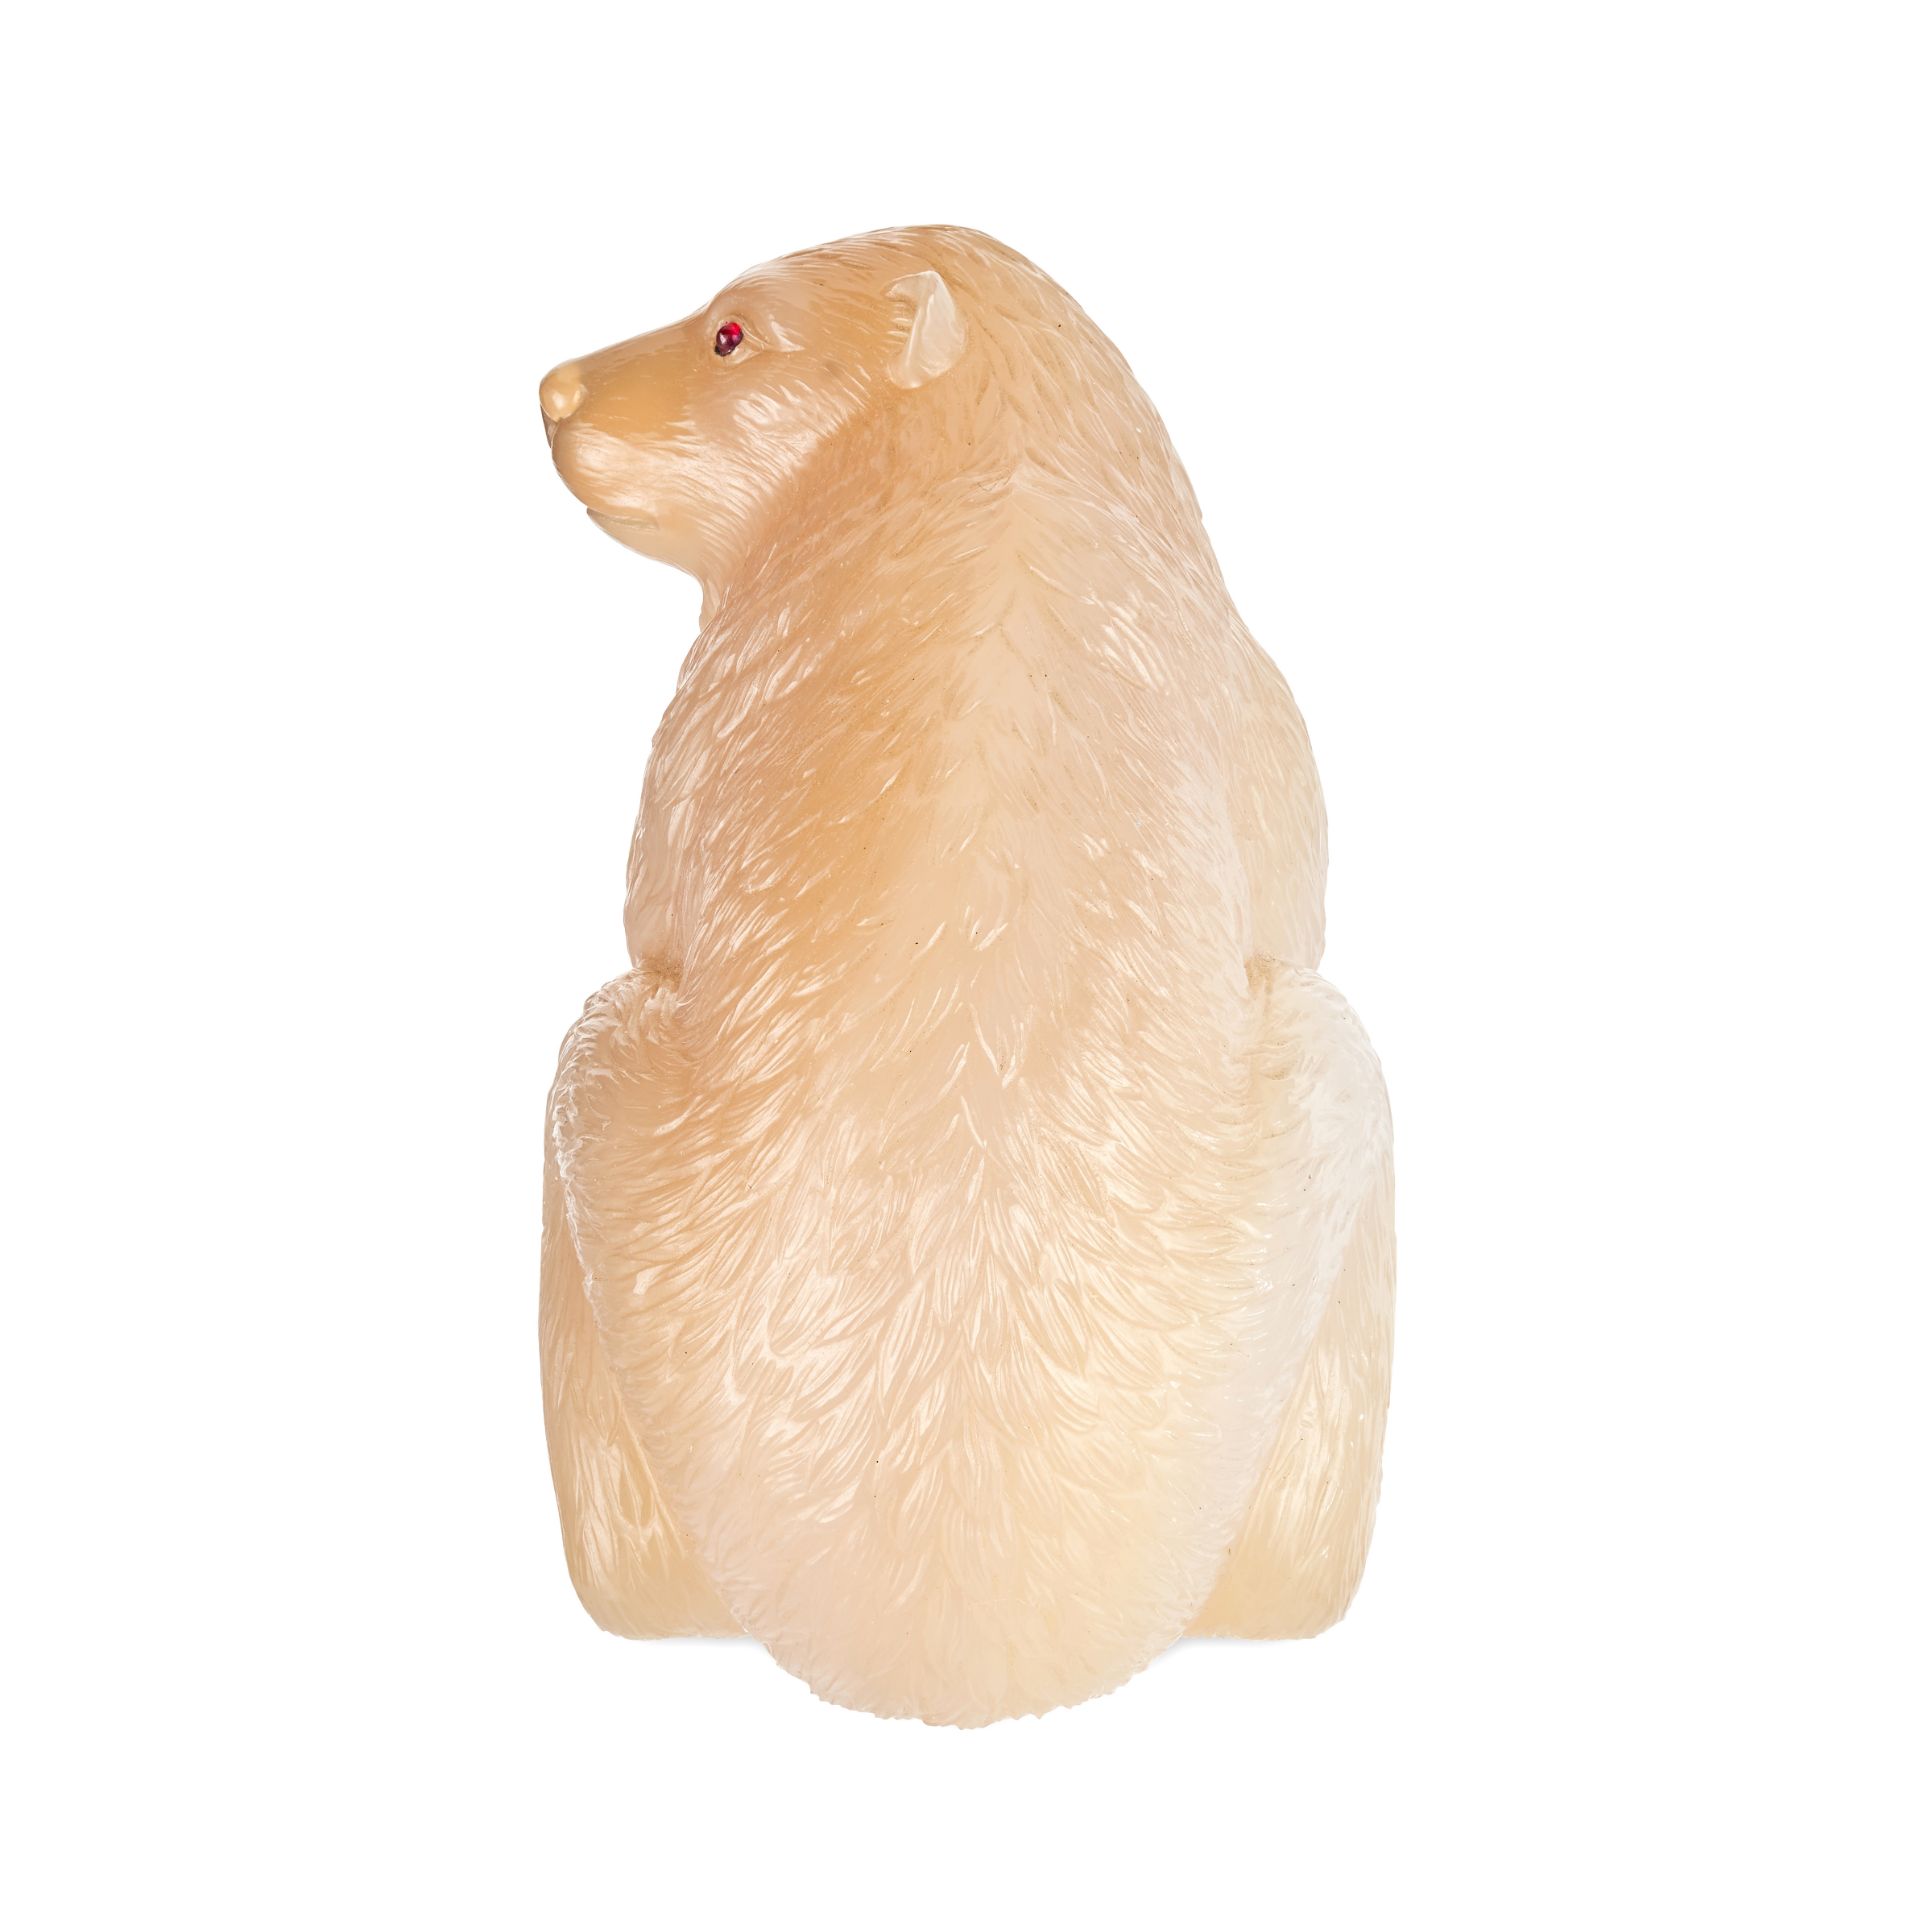 FABERGE, A RARE JEWELLED AGATE MODEL OF A POLAR BEAR, ST PETERSBURG, CIRCA 1900 - Image 5 of 10